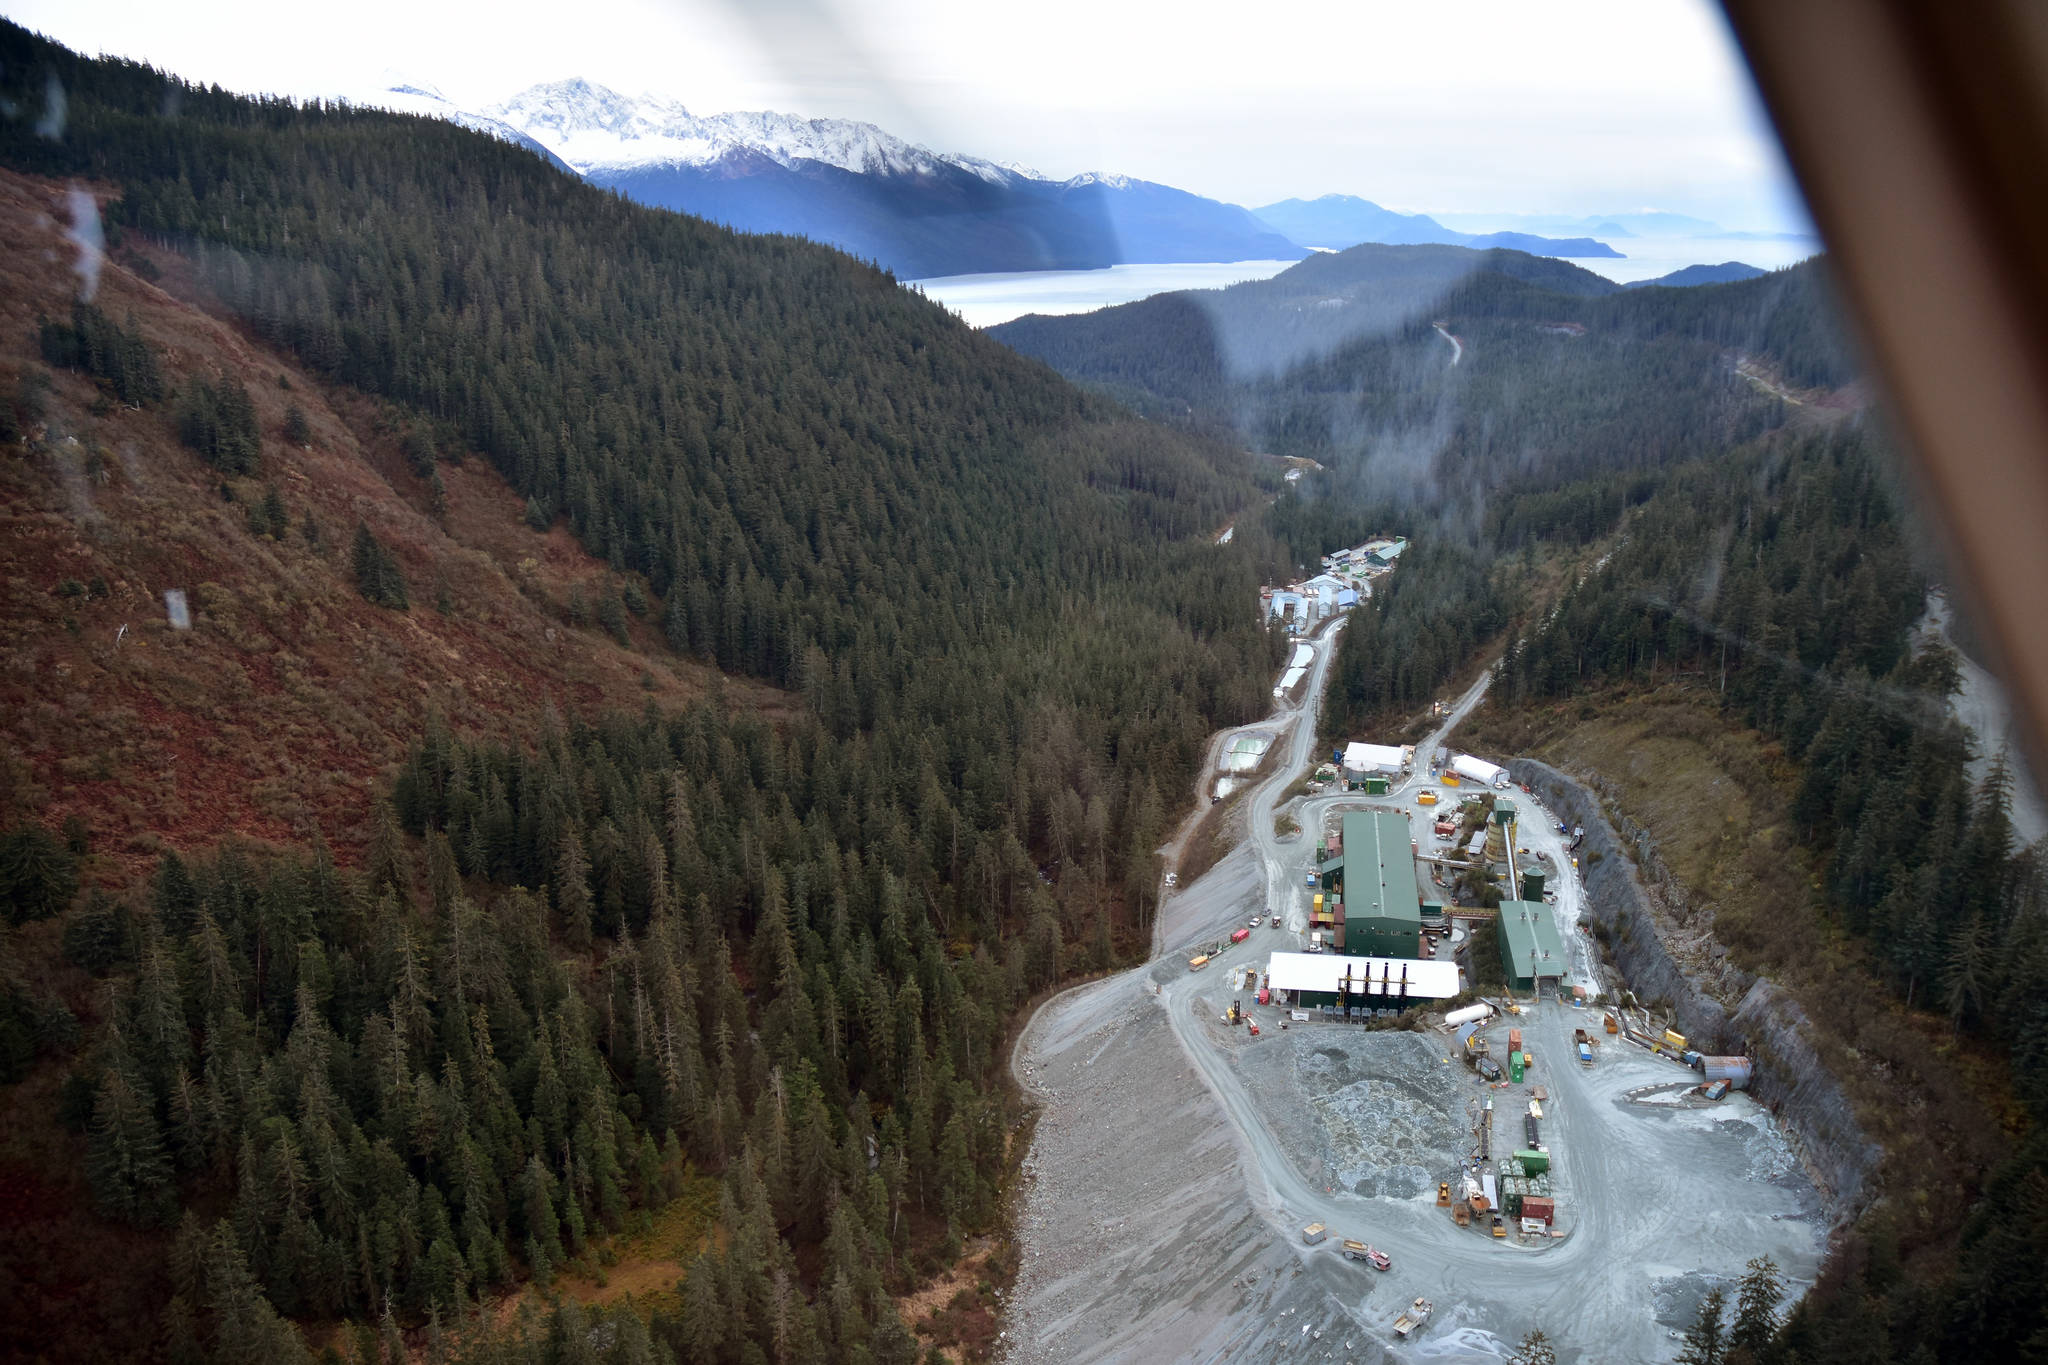 The Kensington Gold Mine facility on Monday, Oct 14. 2019. (Peter Segall | Juneau Empire)